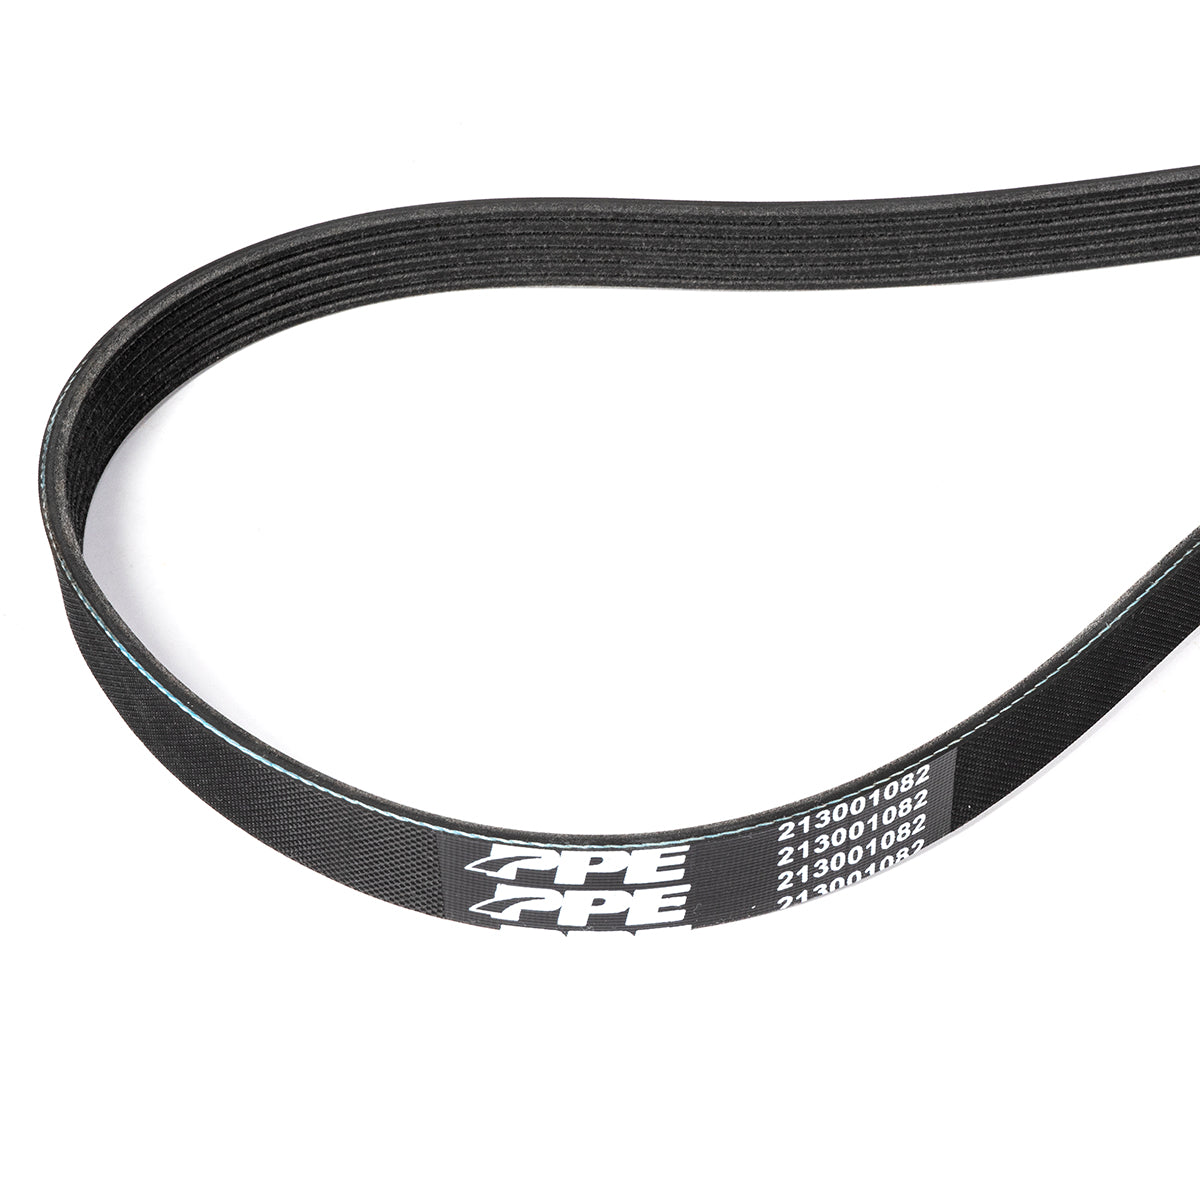 High-Performance Heavy-Duty Serpentine Belt - 2005-2024 Dodge Challenger/Charger/Durango, Jeep Grand Cherokee, Chrysler 300 - 5.7L and 6.4L V8 - PPE - Pacific Performance Engineering